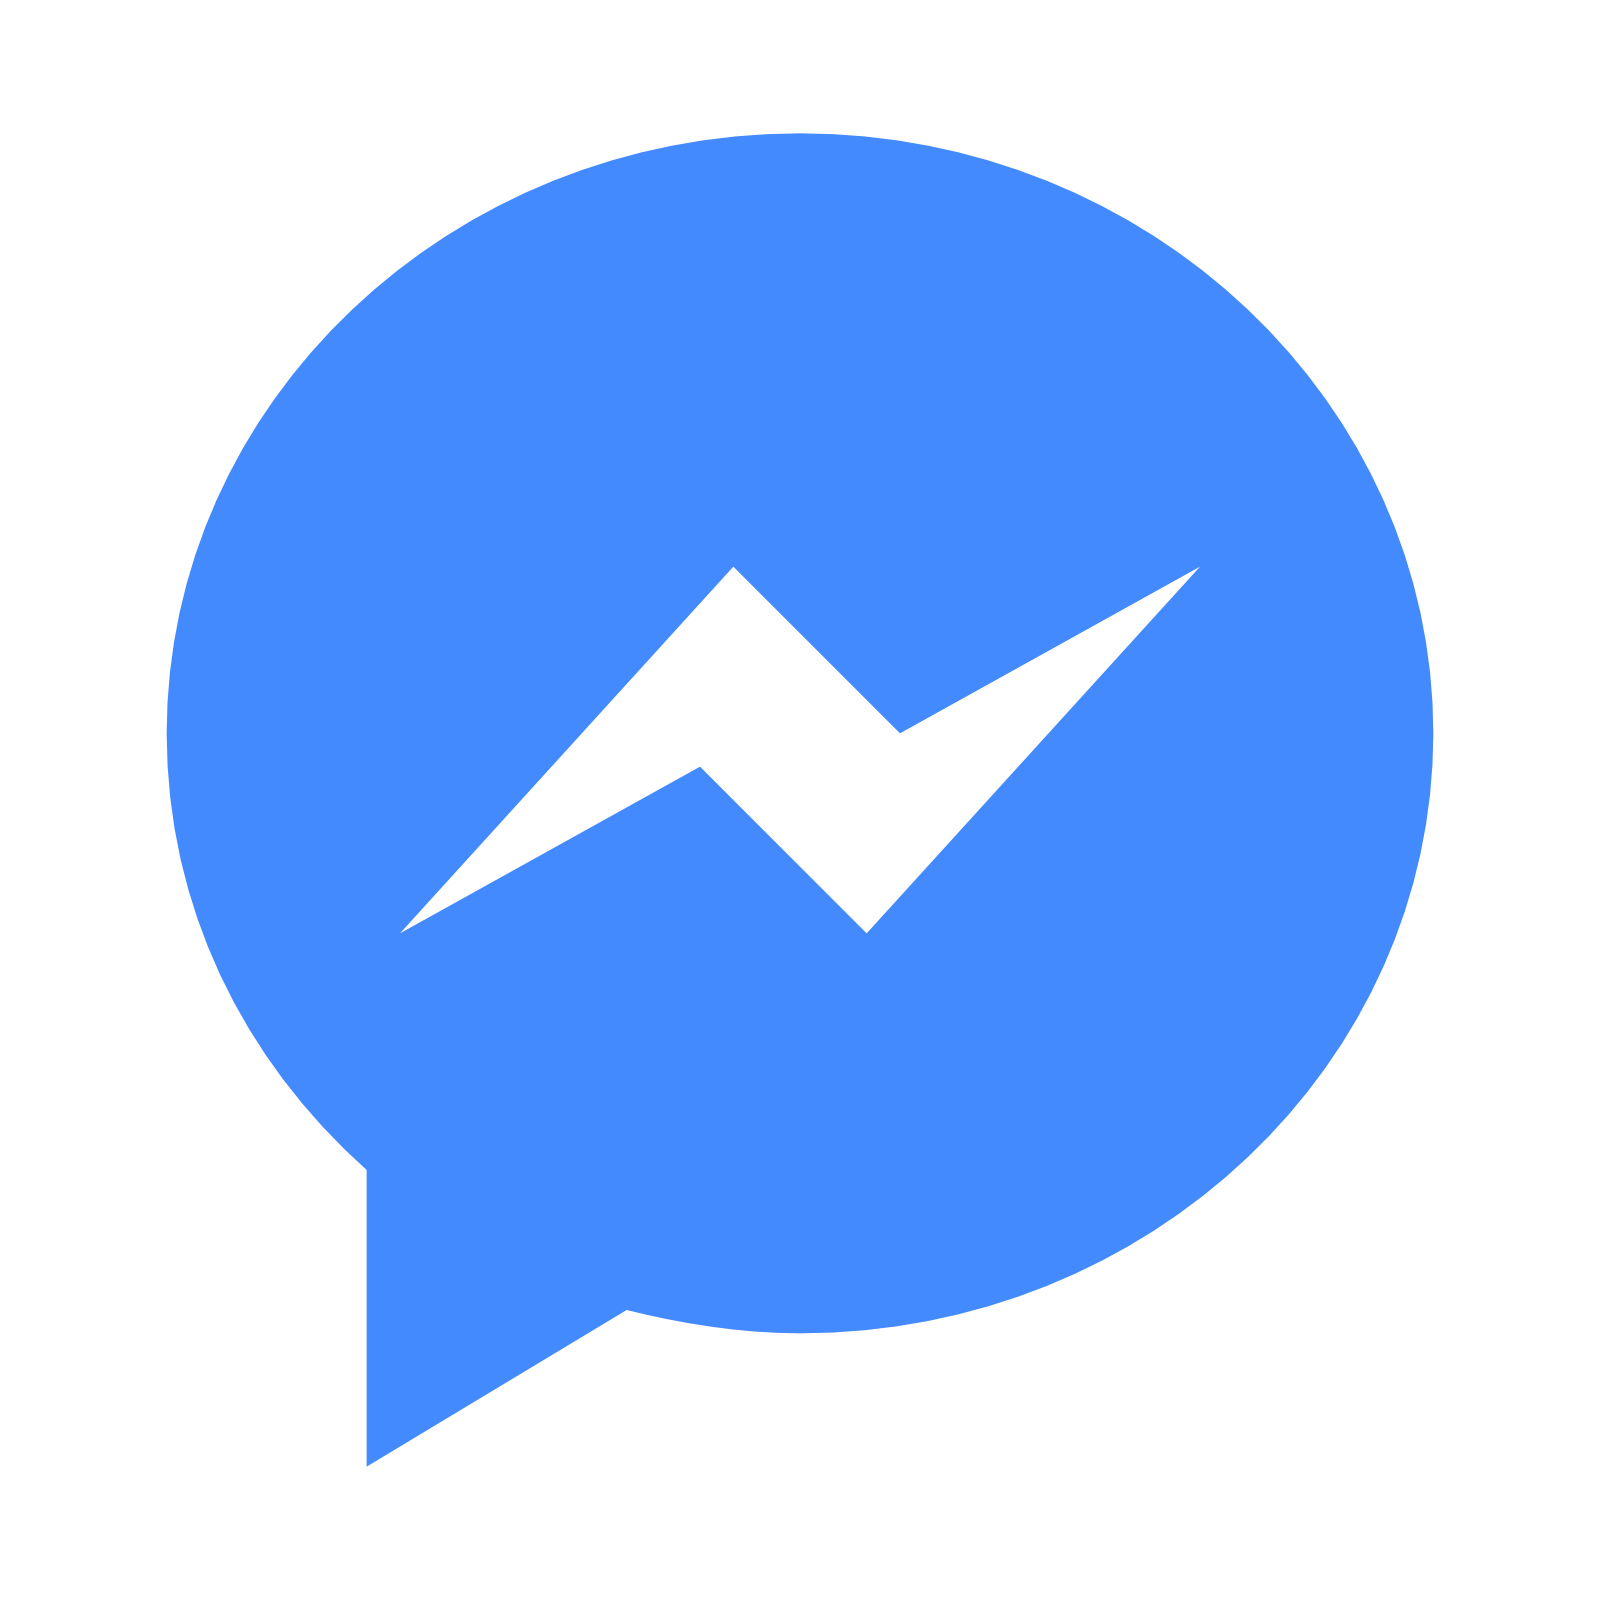 Facebook Chat Logo - Facebook Messenger Logo Transparent PNG Pictures - Free Icons and ...